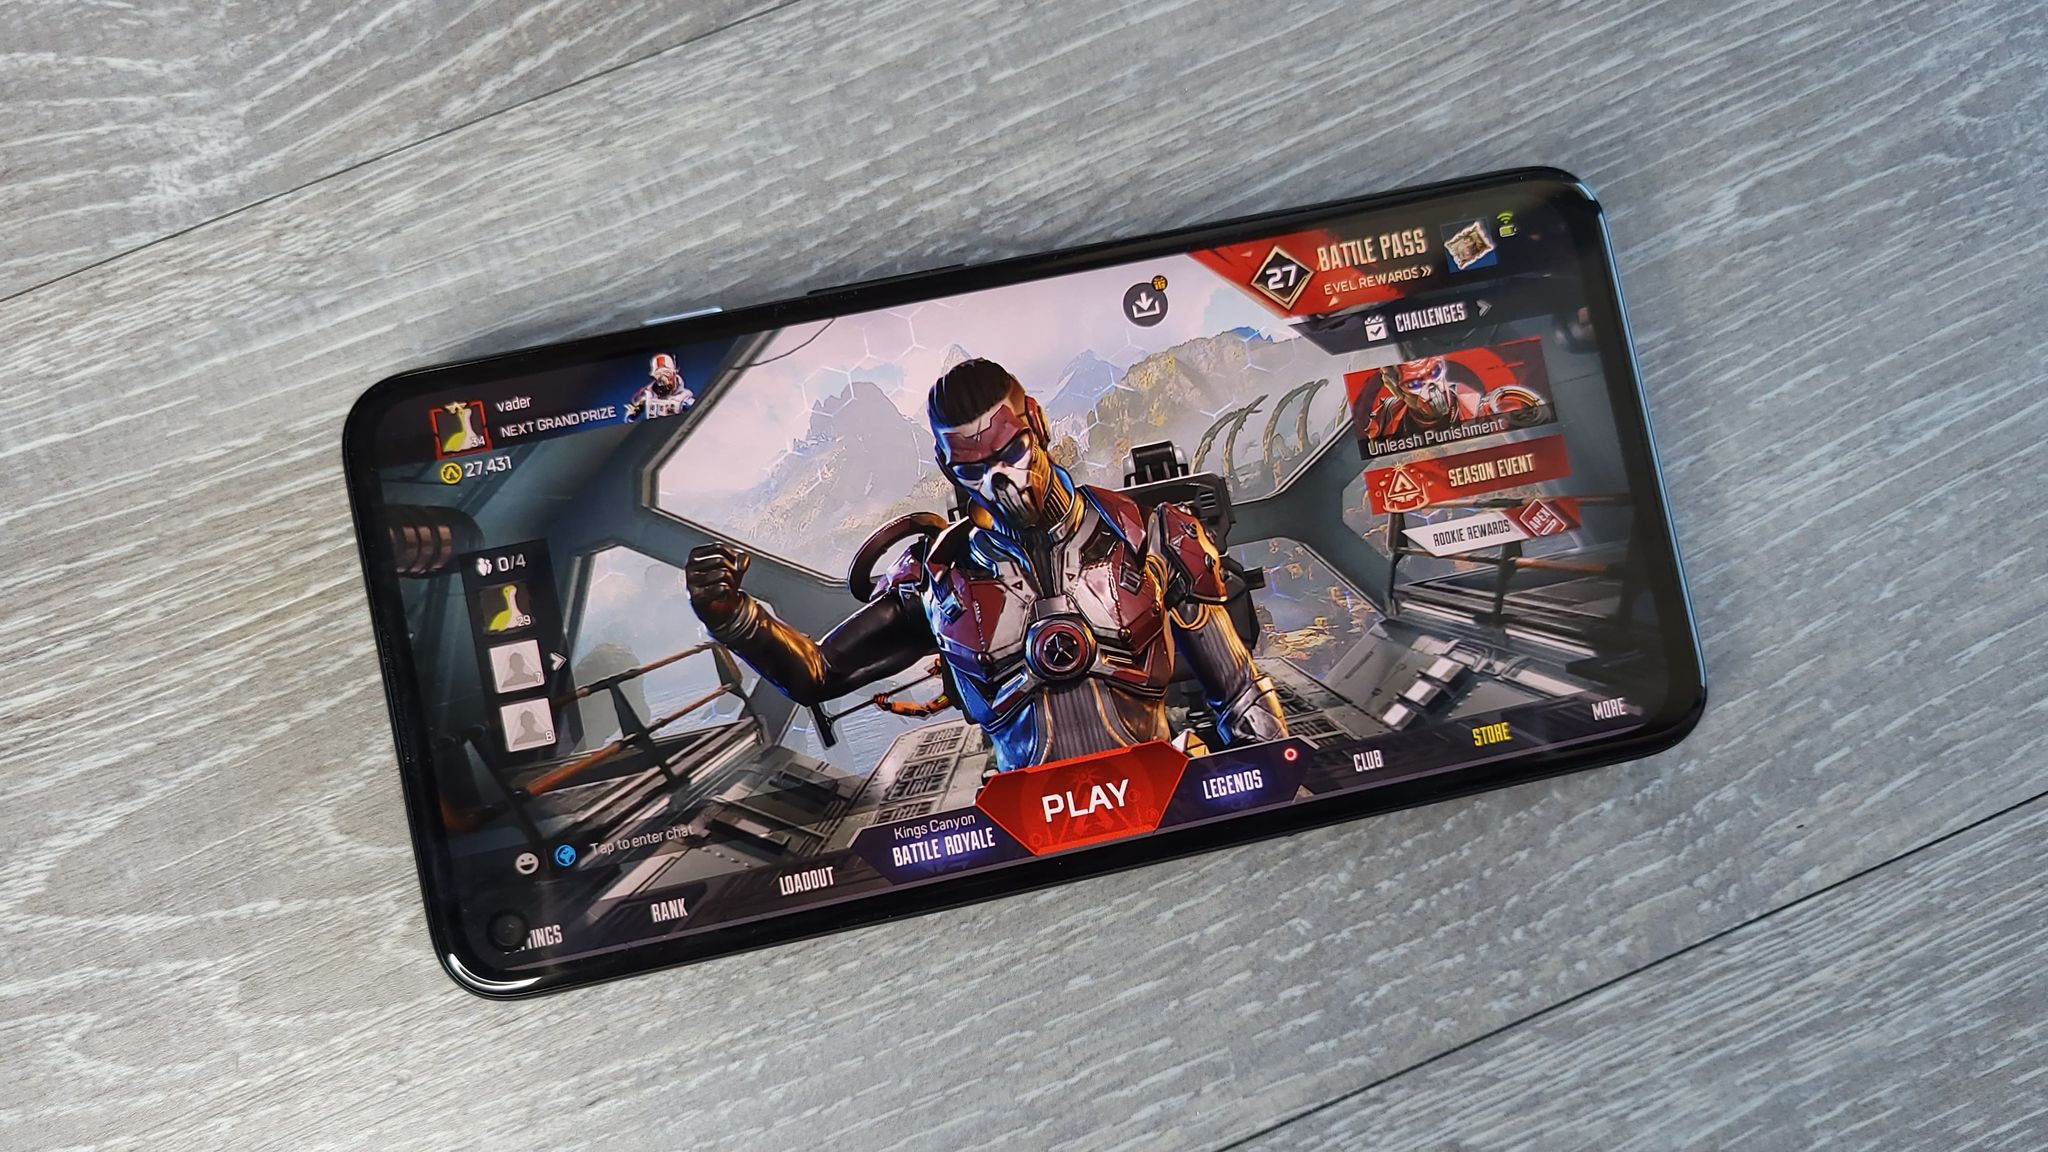 Apex Legends Mobile is now available on Google Play Store - 9to5Google